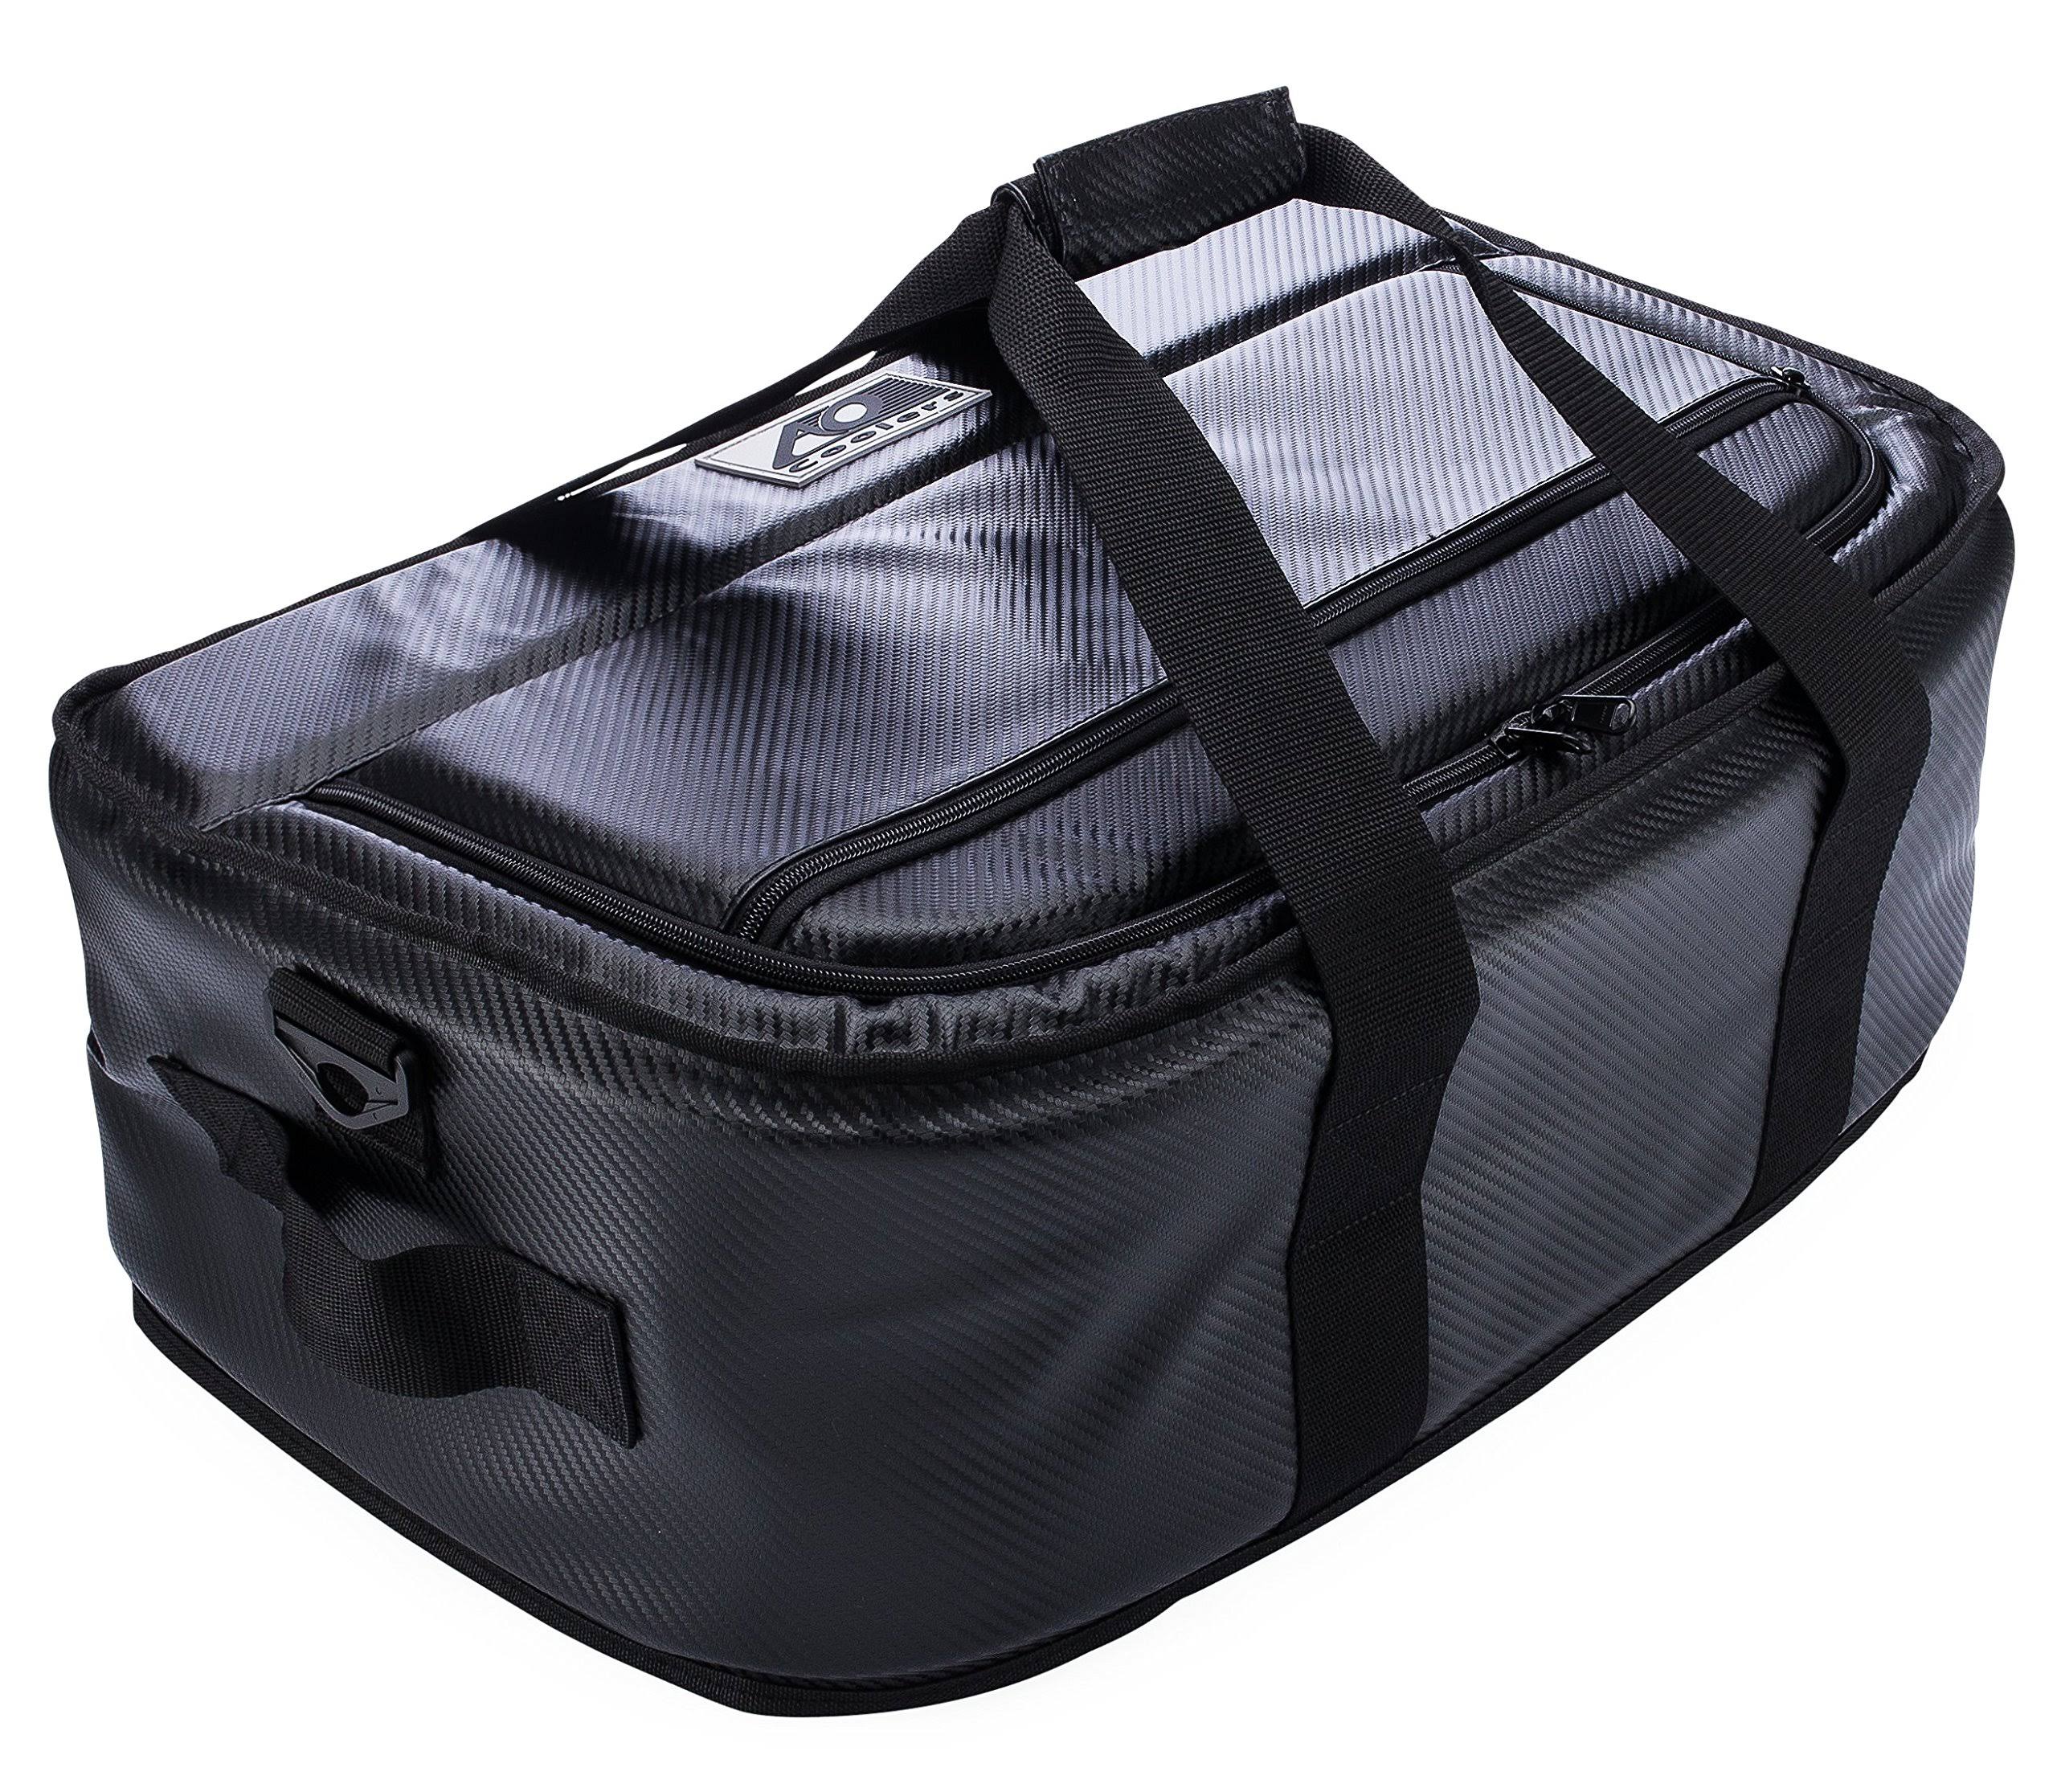 AO Coolers 38 Pack Stow-N-Go Cooler Carbon Black - WXF-02